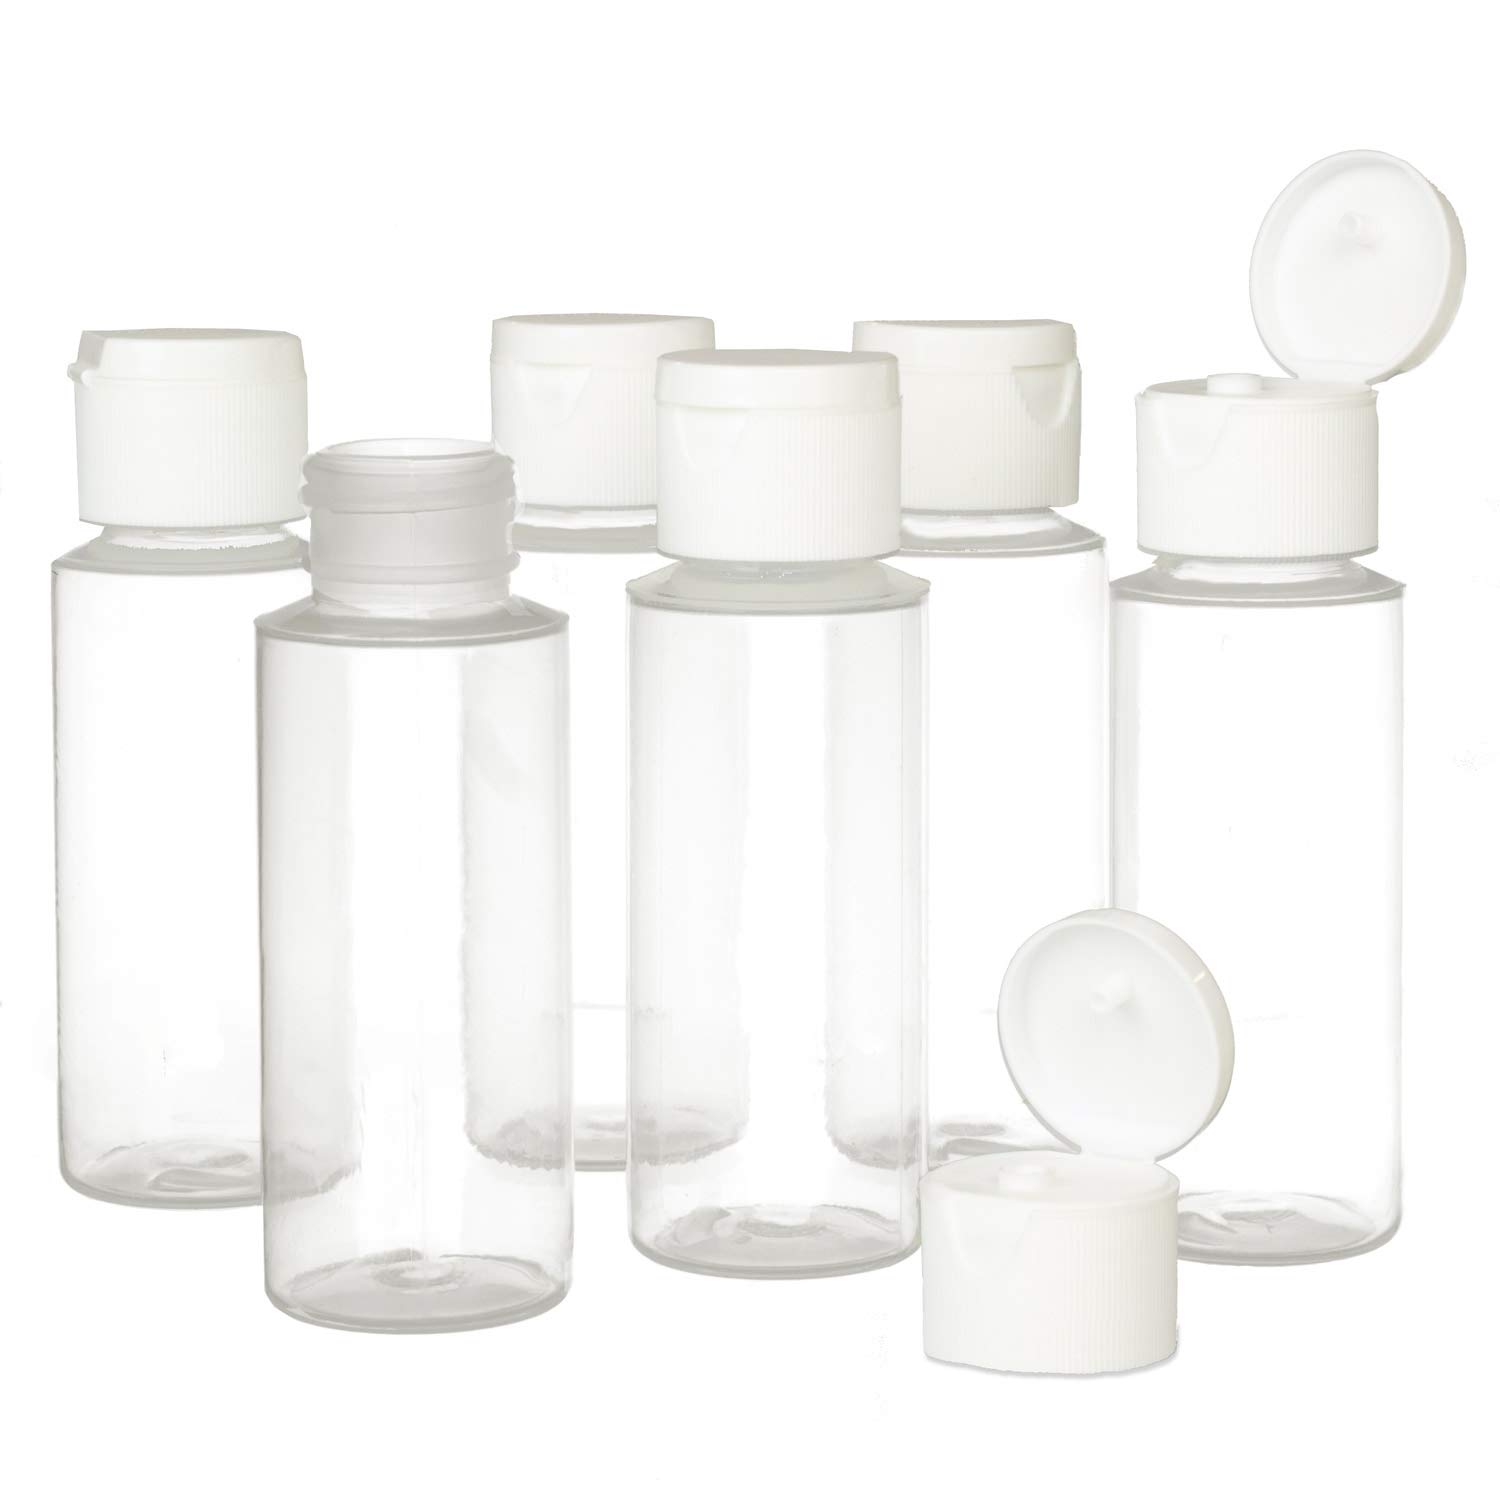 Chica and Jo 2oz Clear Plastic Empty Squeeze Bottles with Flip Cap - BPA-free - Set of 6 - TSA Travel Size 2 Ounce